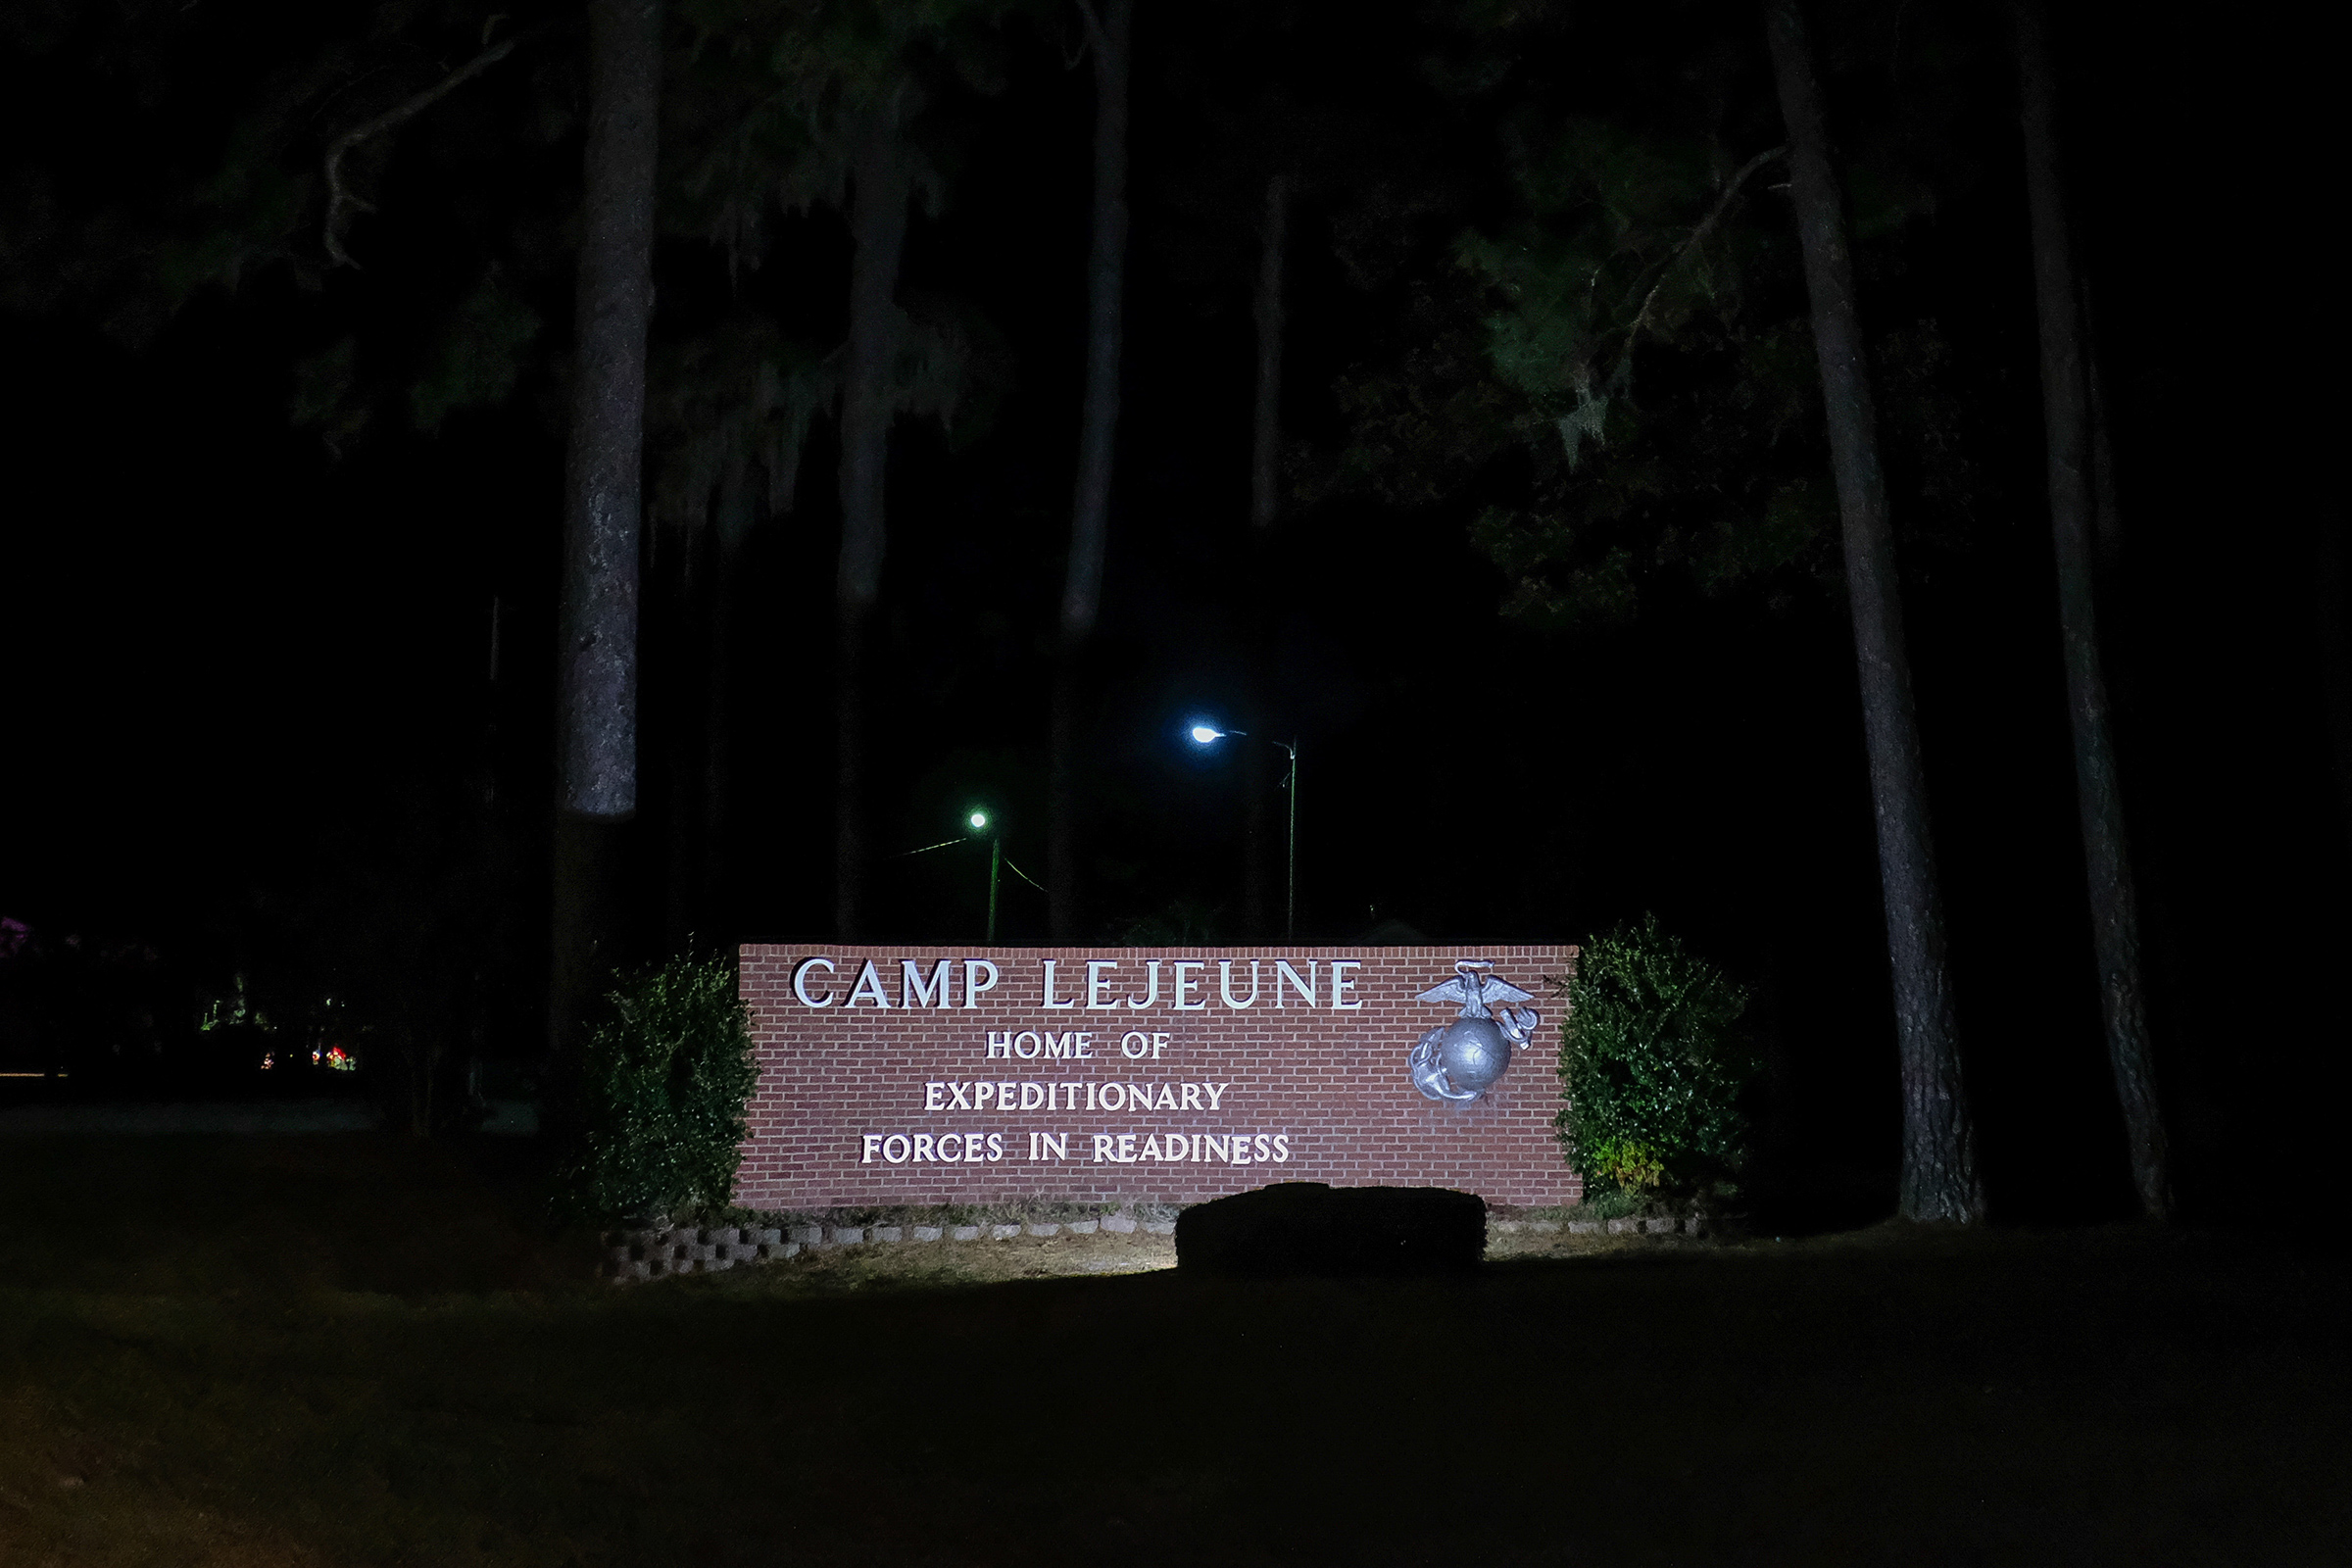 Camp Lejeune by night on Oct. 28, 2017. (Fred Marie—Art In All Of Us/Corbis/Getty Images)